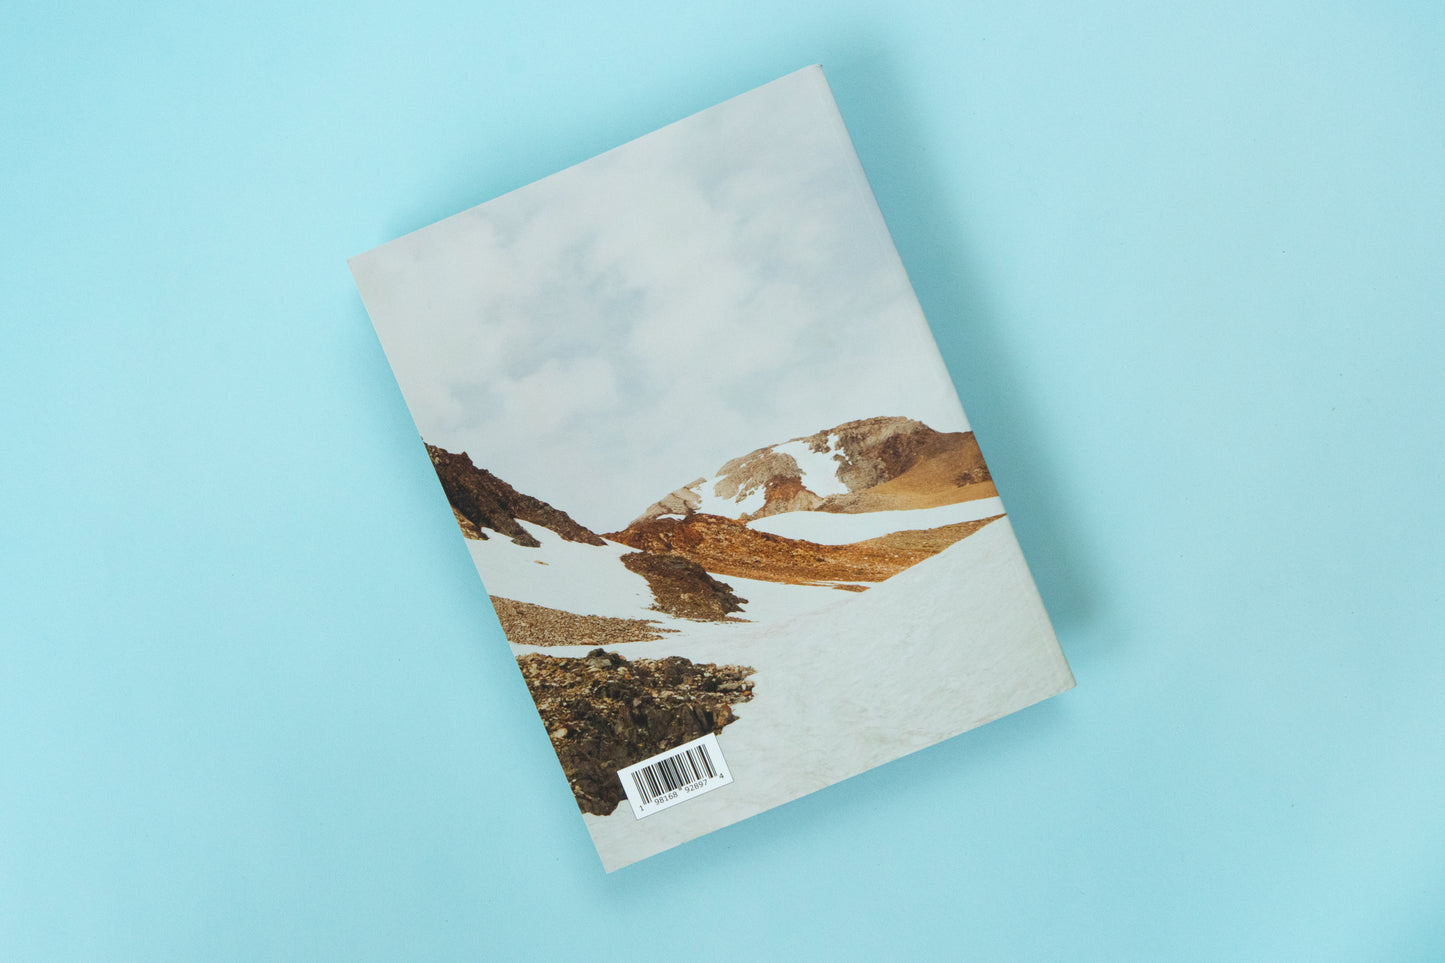 The back of a magazine is over a blue background. The image is a bright snowy mountain scene with peeks of muted yellow and orange tone rocks peeking out of the snow covered ground. 